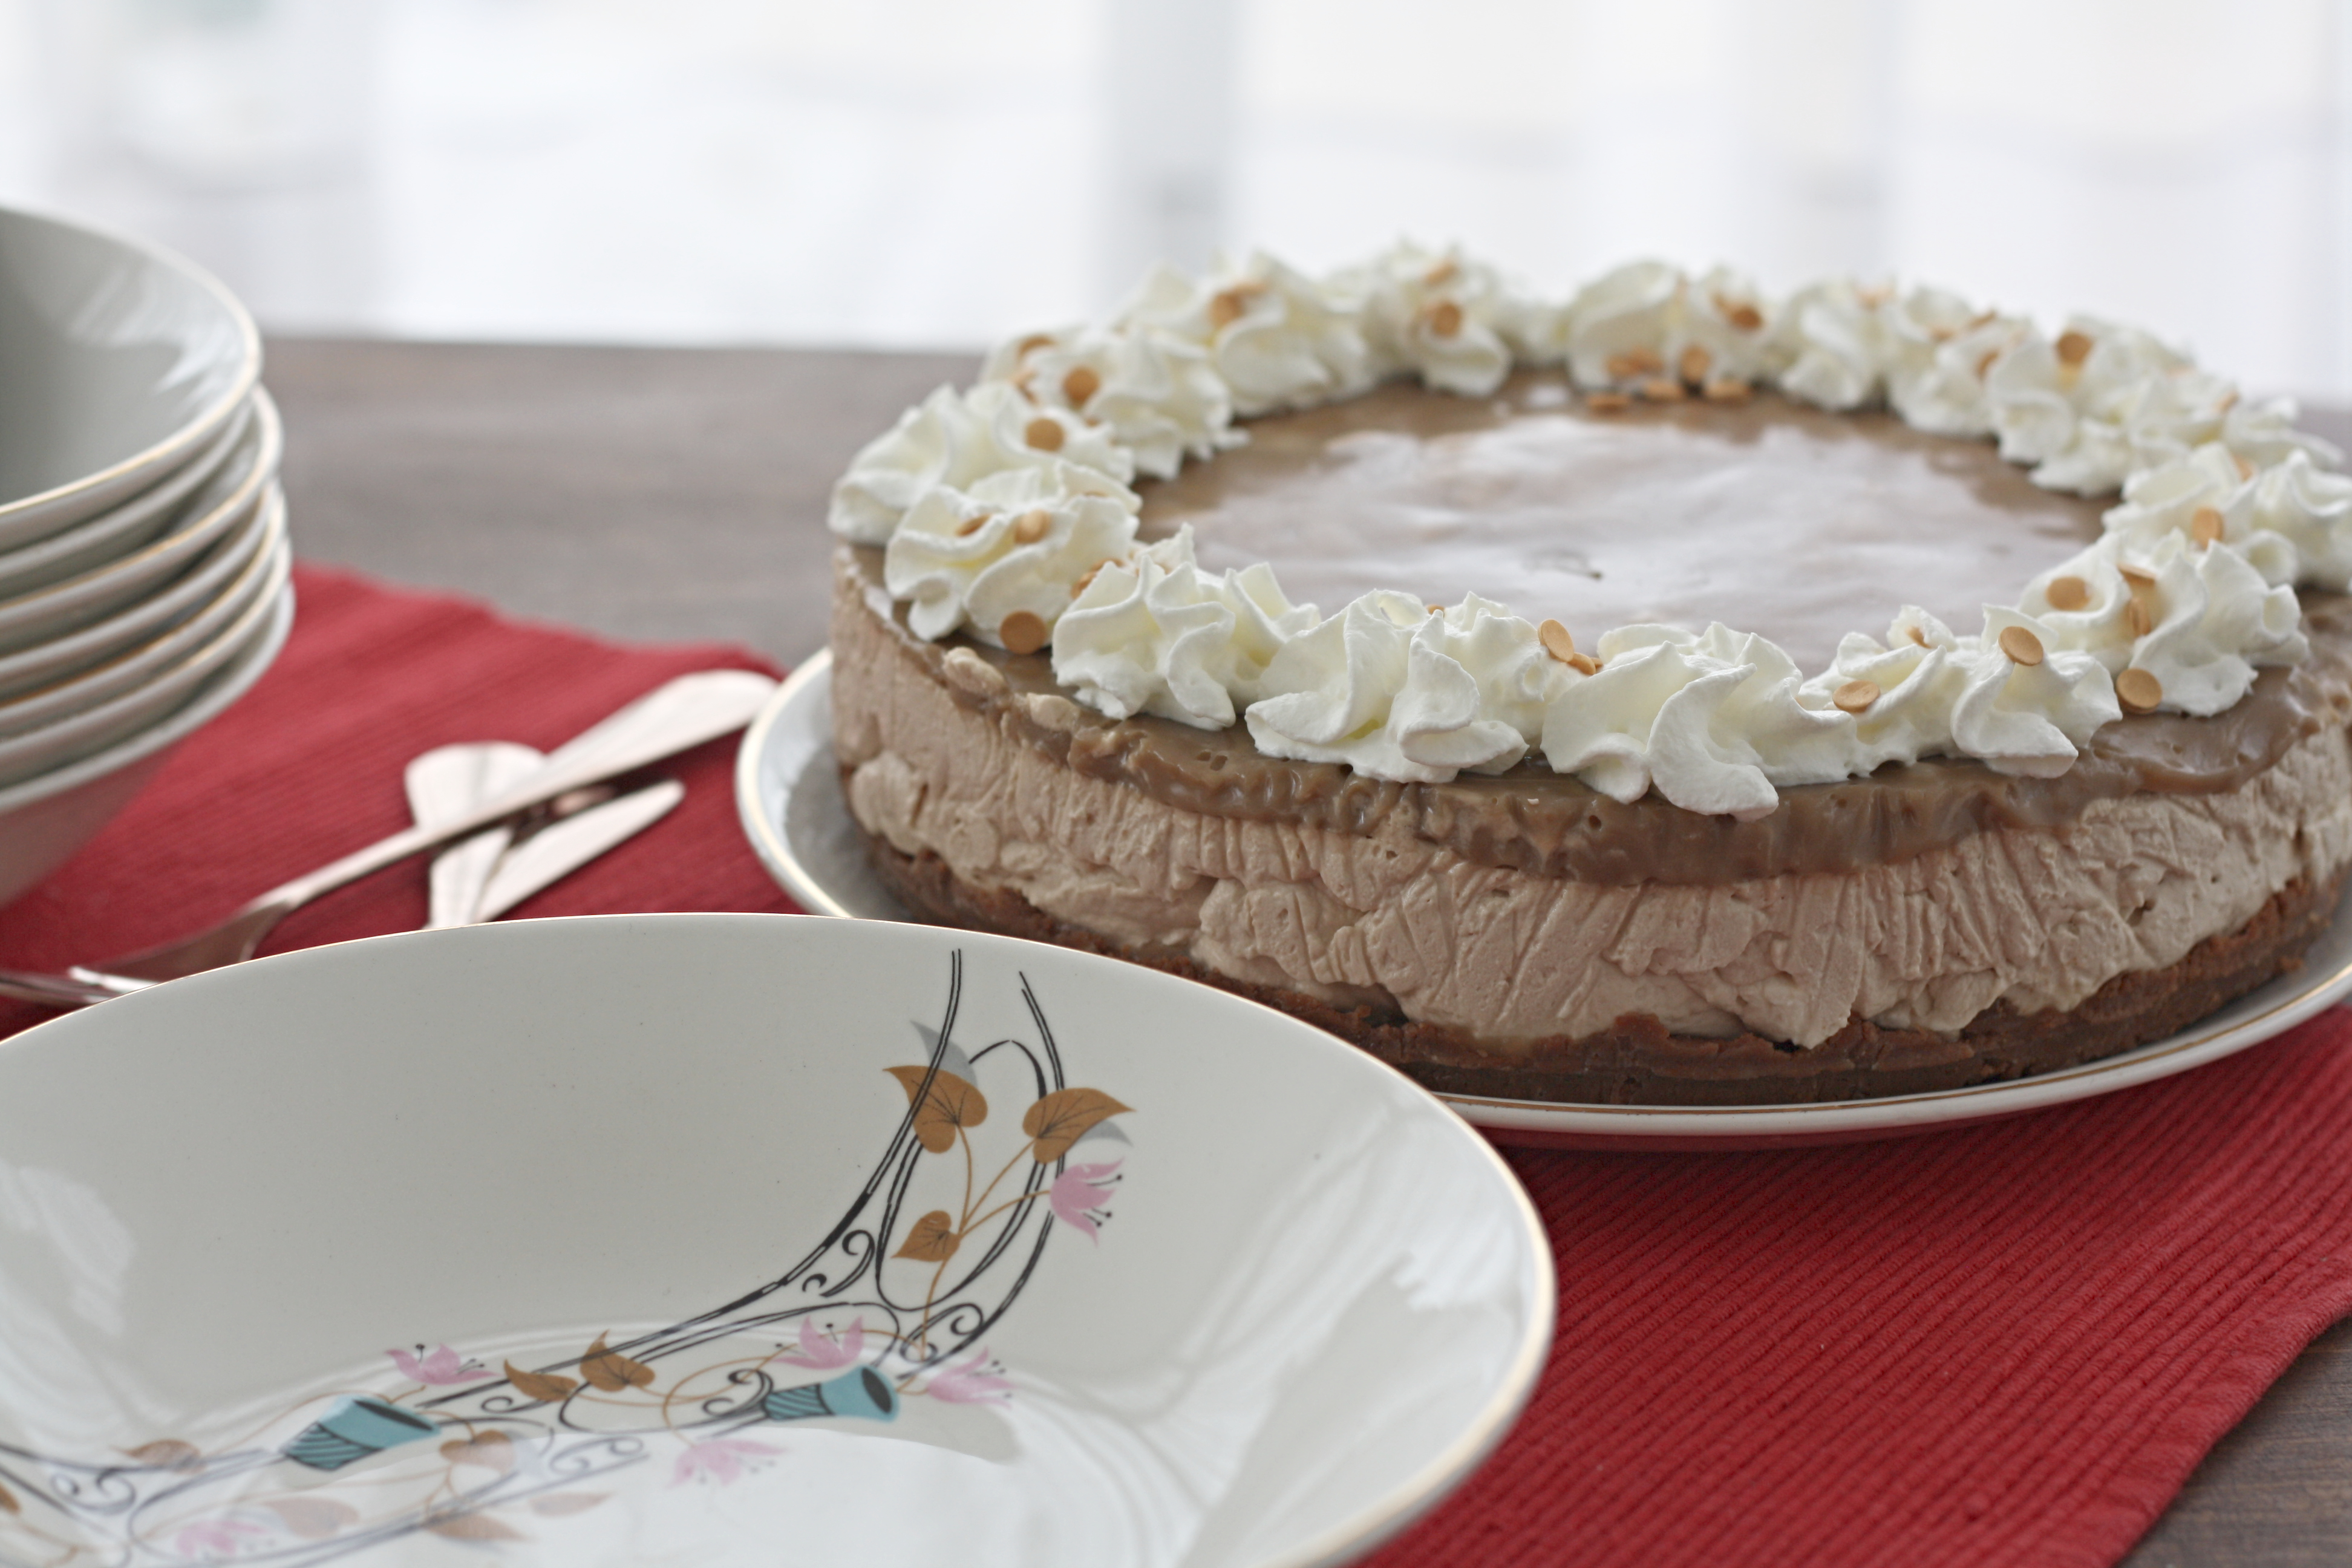 Coffee and Caramel Biscoff Cheesecake - Makes, Bakes and Decor